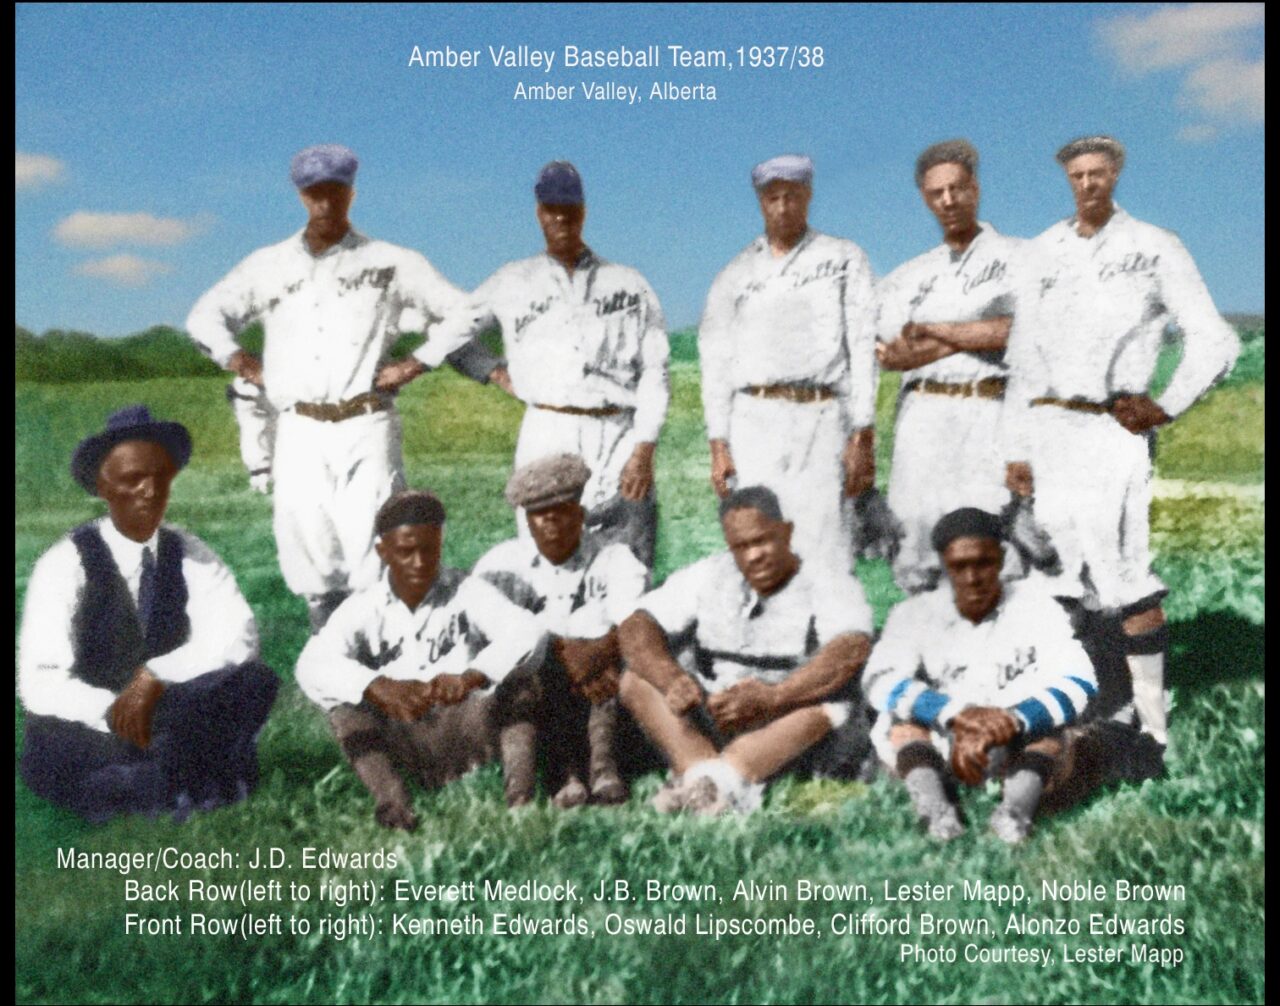 Picture of the Amber Valley Baseball Team